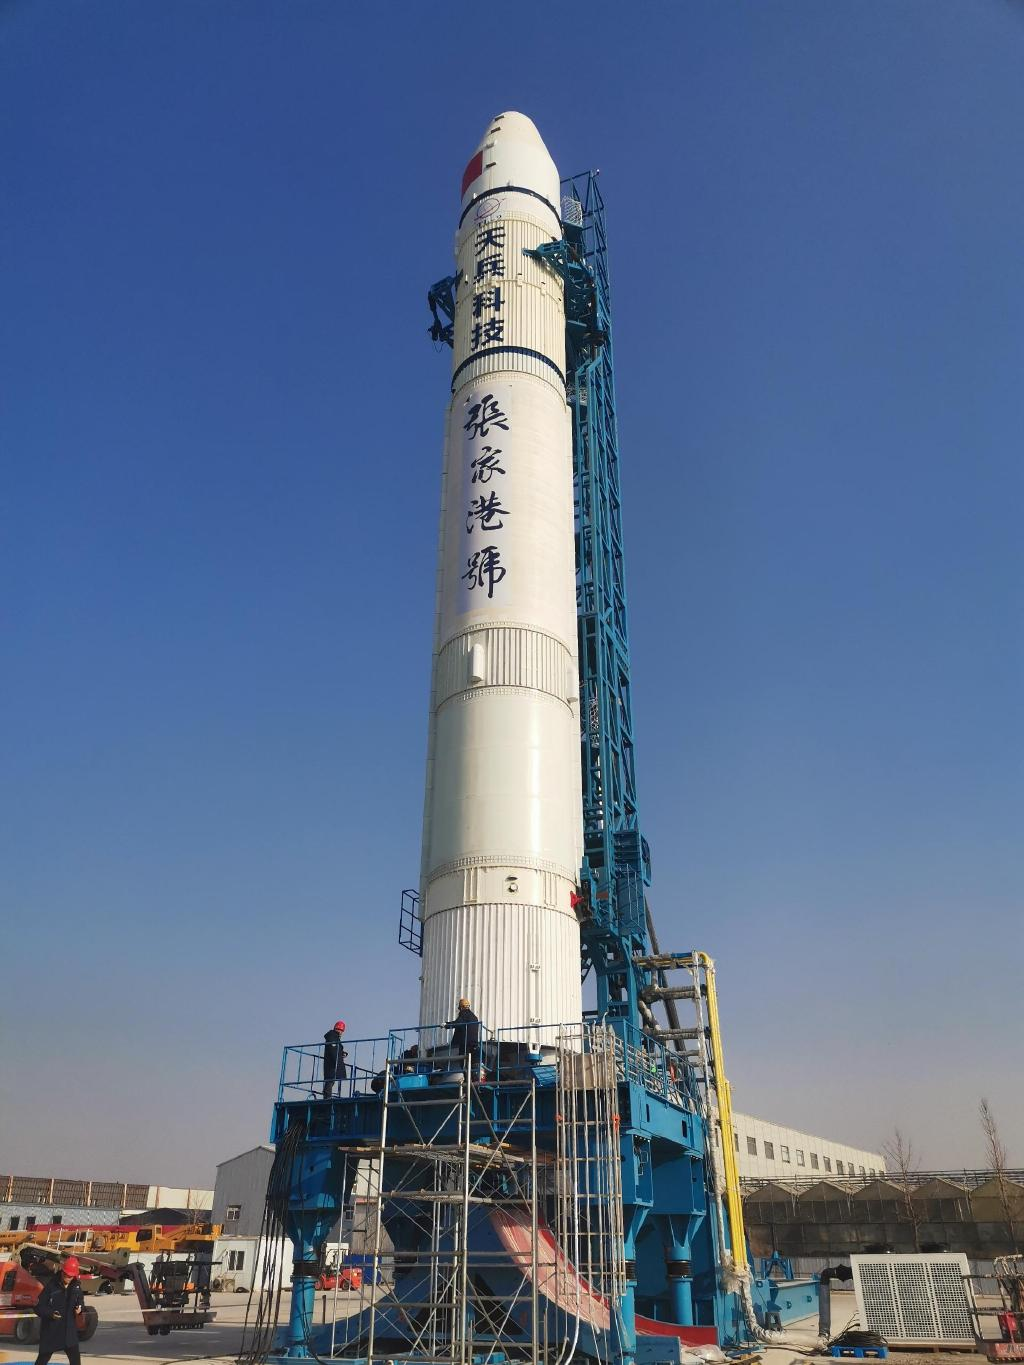 Tianlong-2 mock-up on a mock-up launchpad.